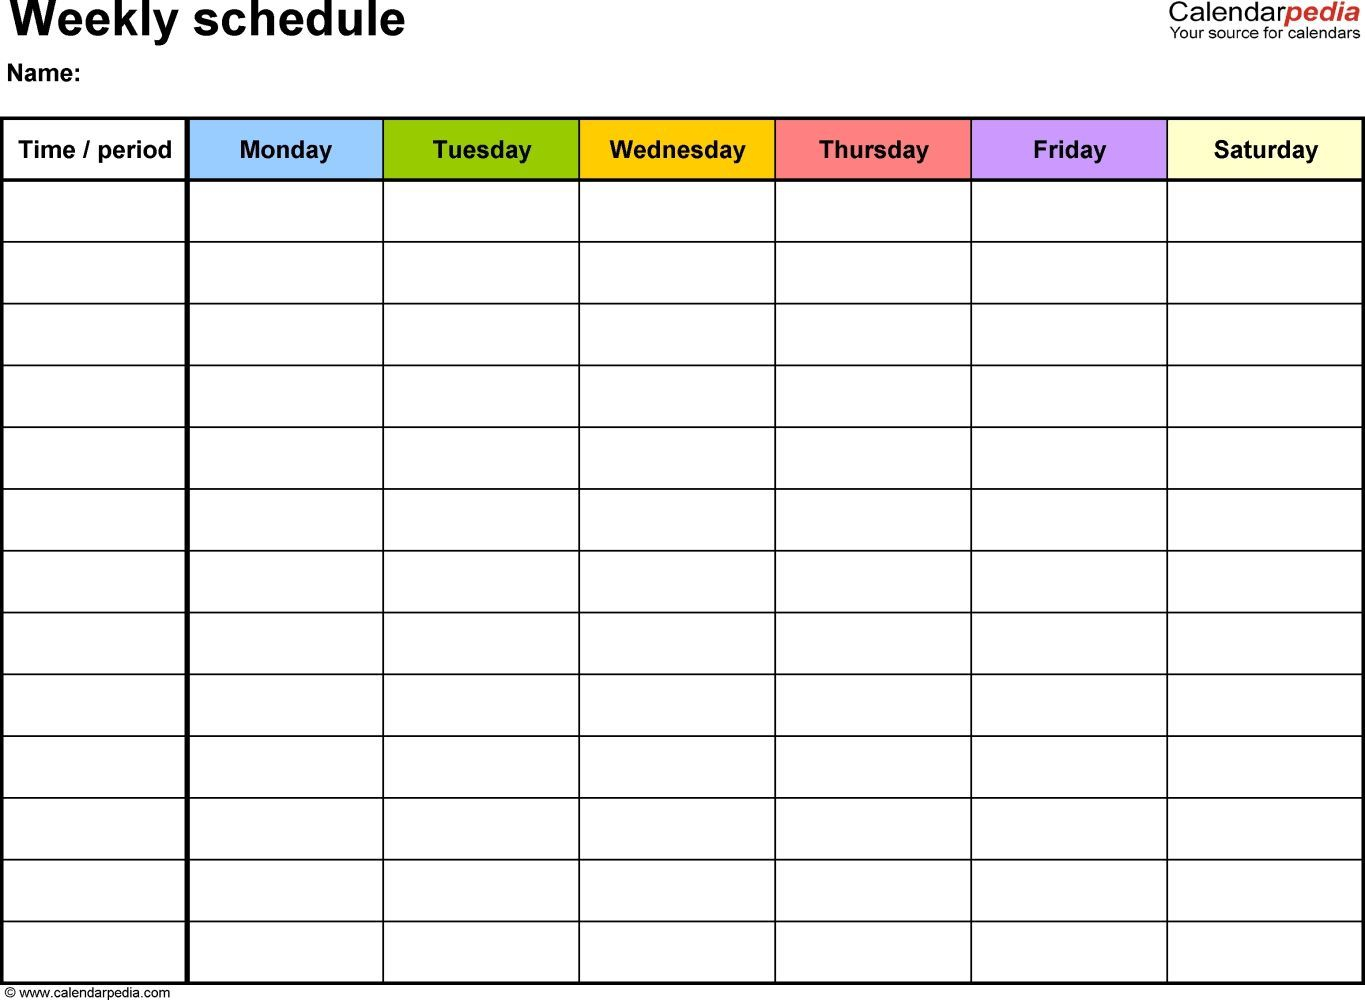 Daily Appointment Calendar Printable E With Time Slots Worksheets Make